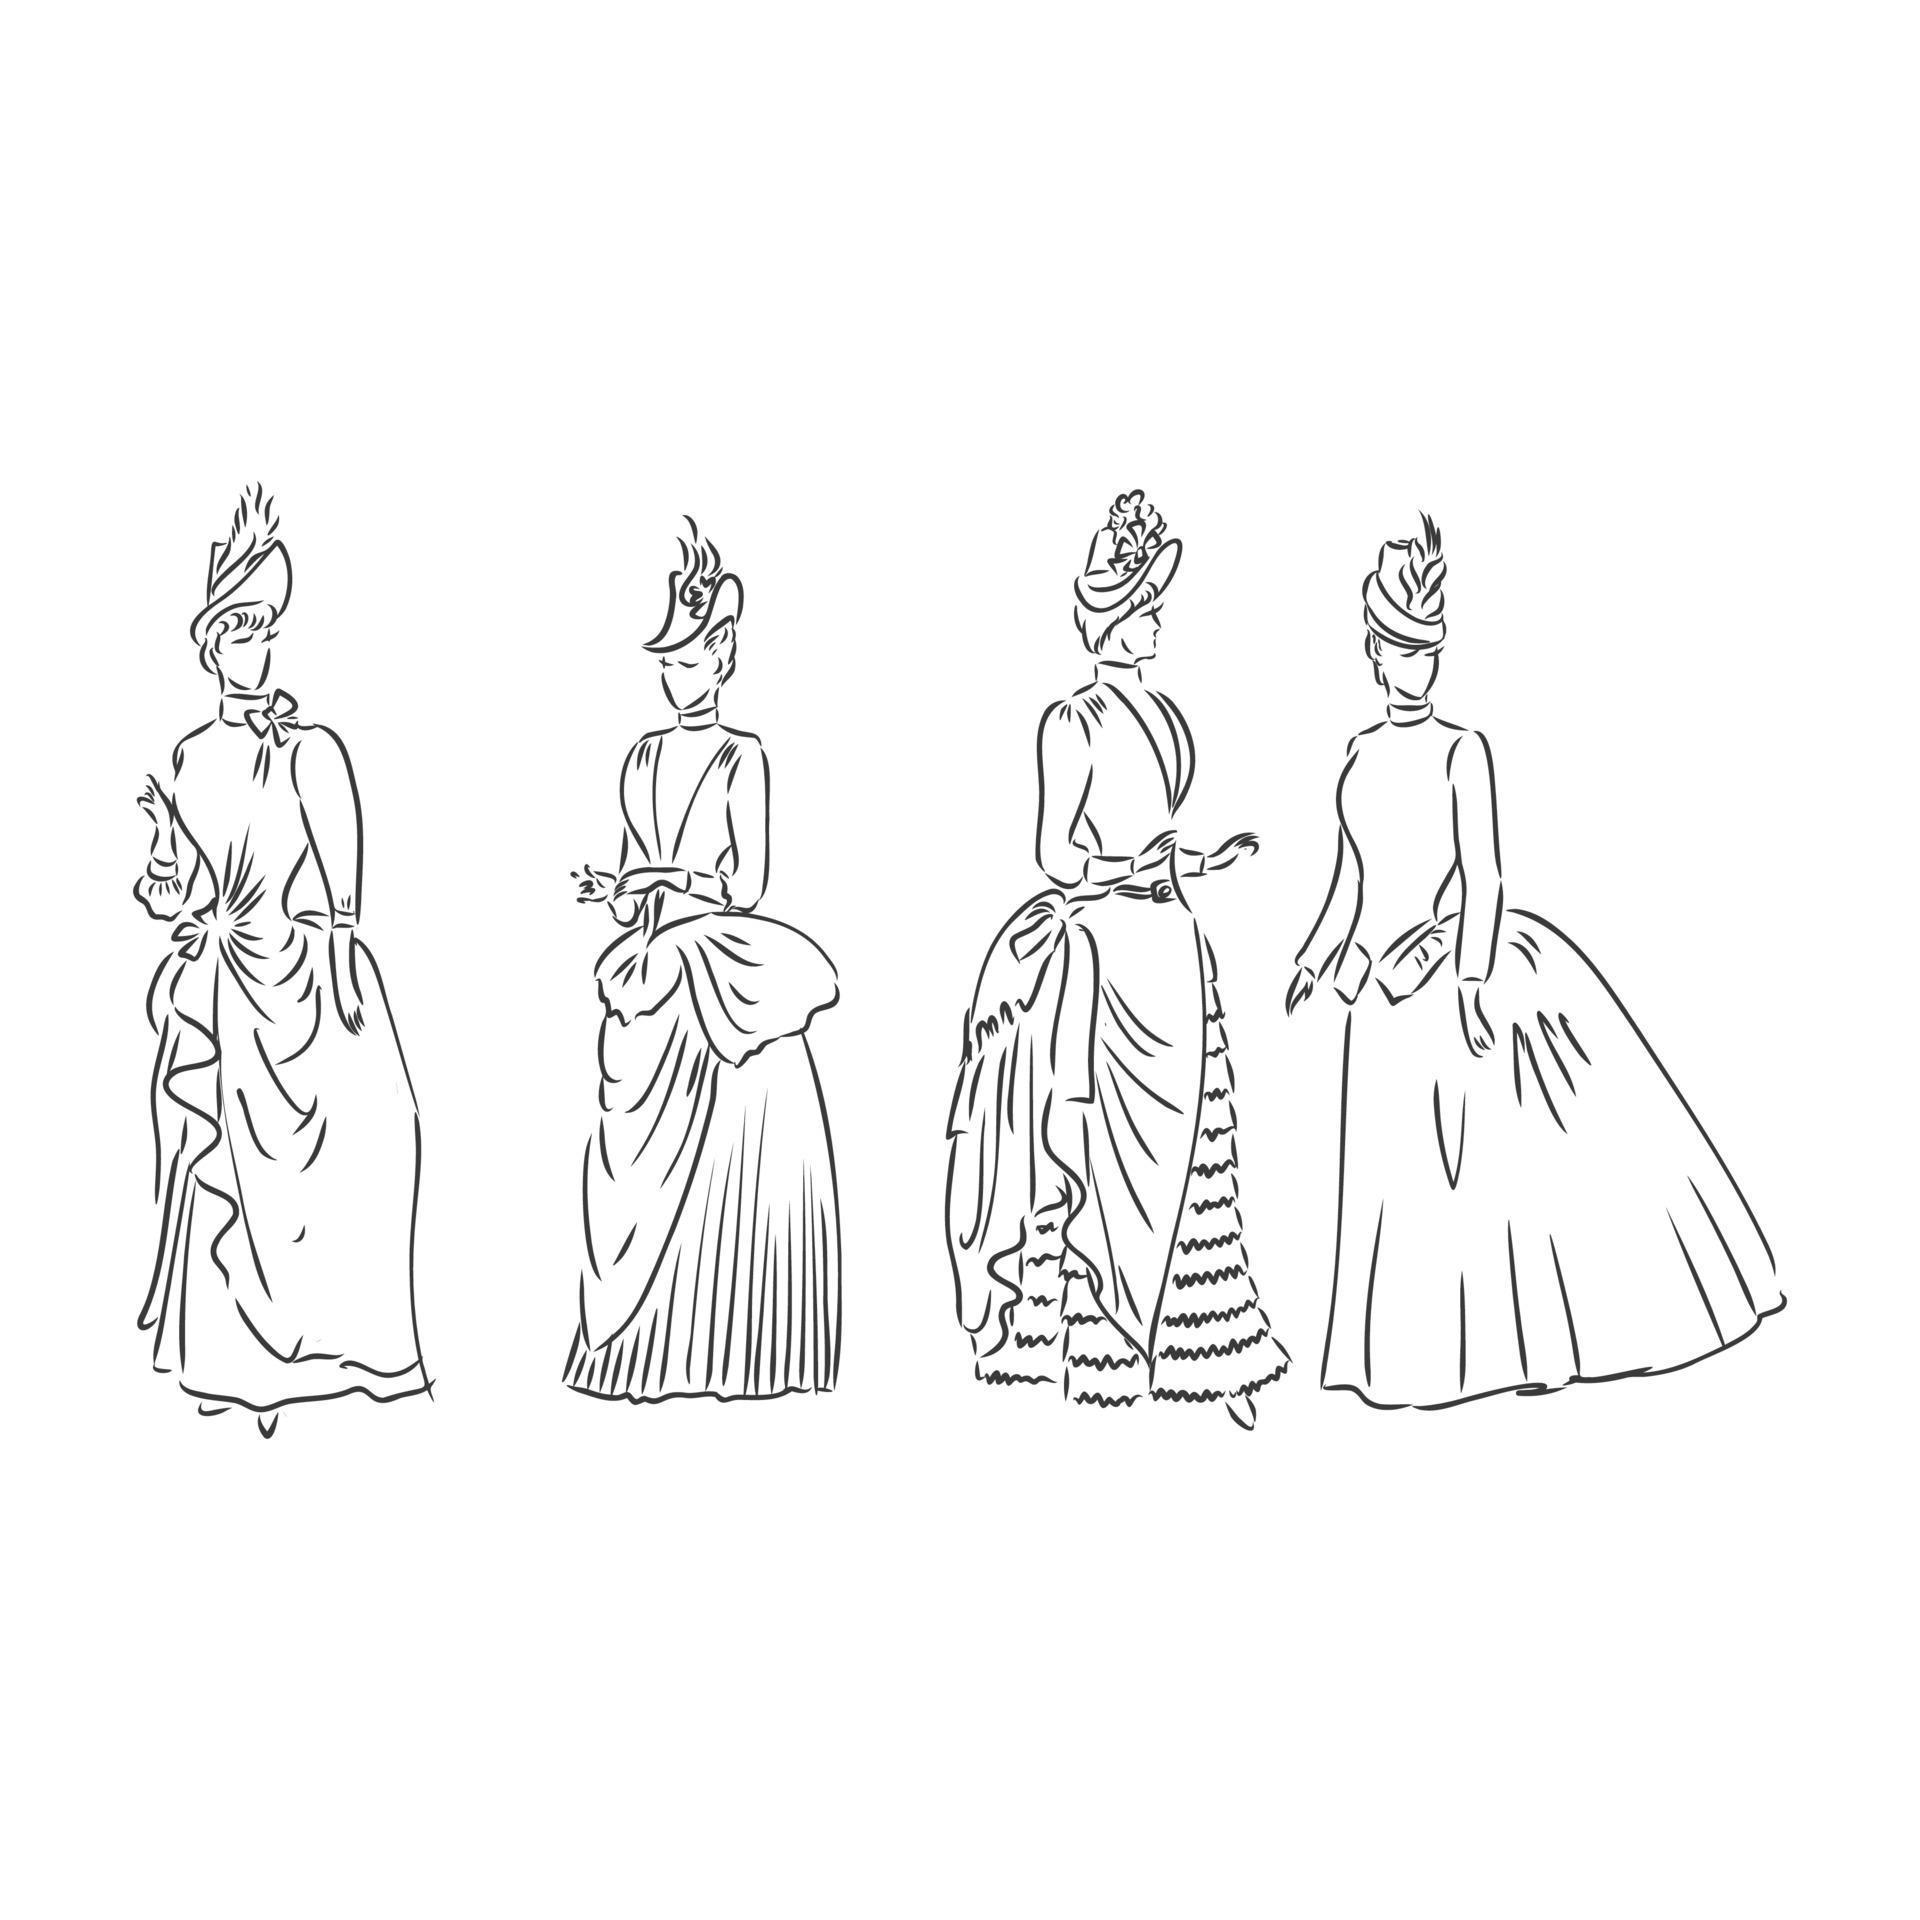 Antique dressed lady. Old fashion vector illustration. Victorian woman